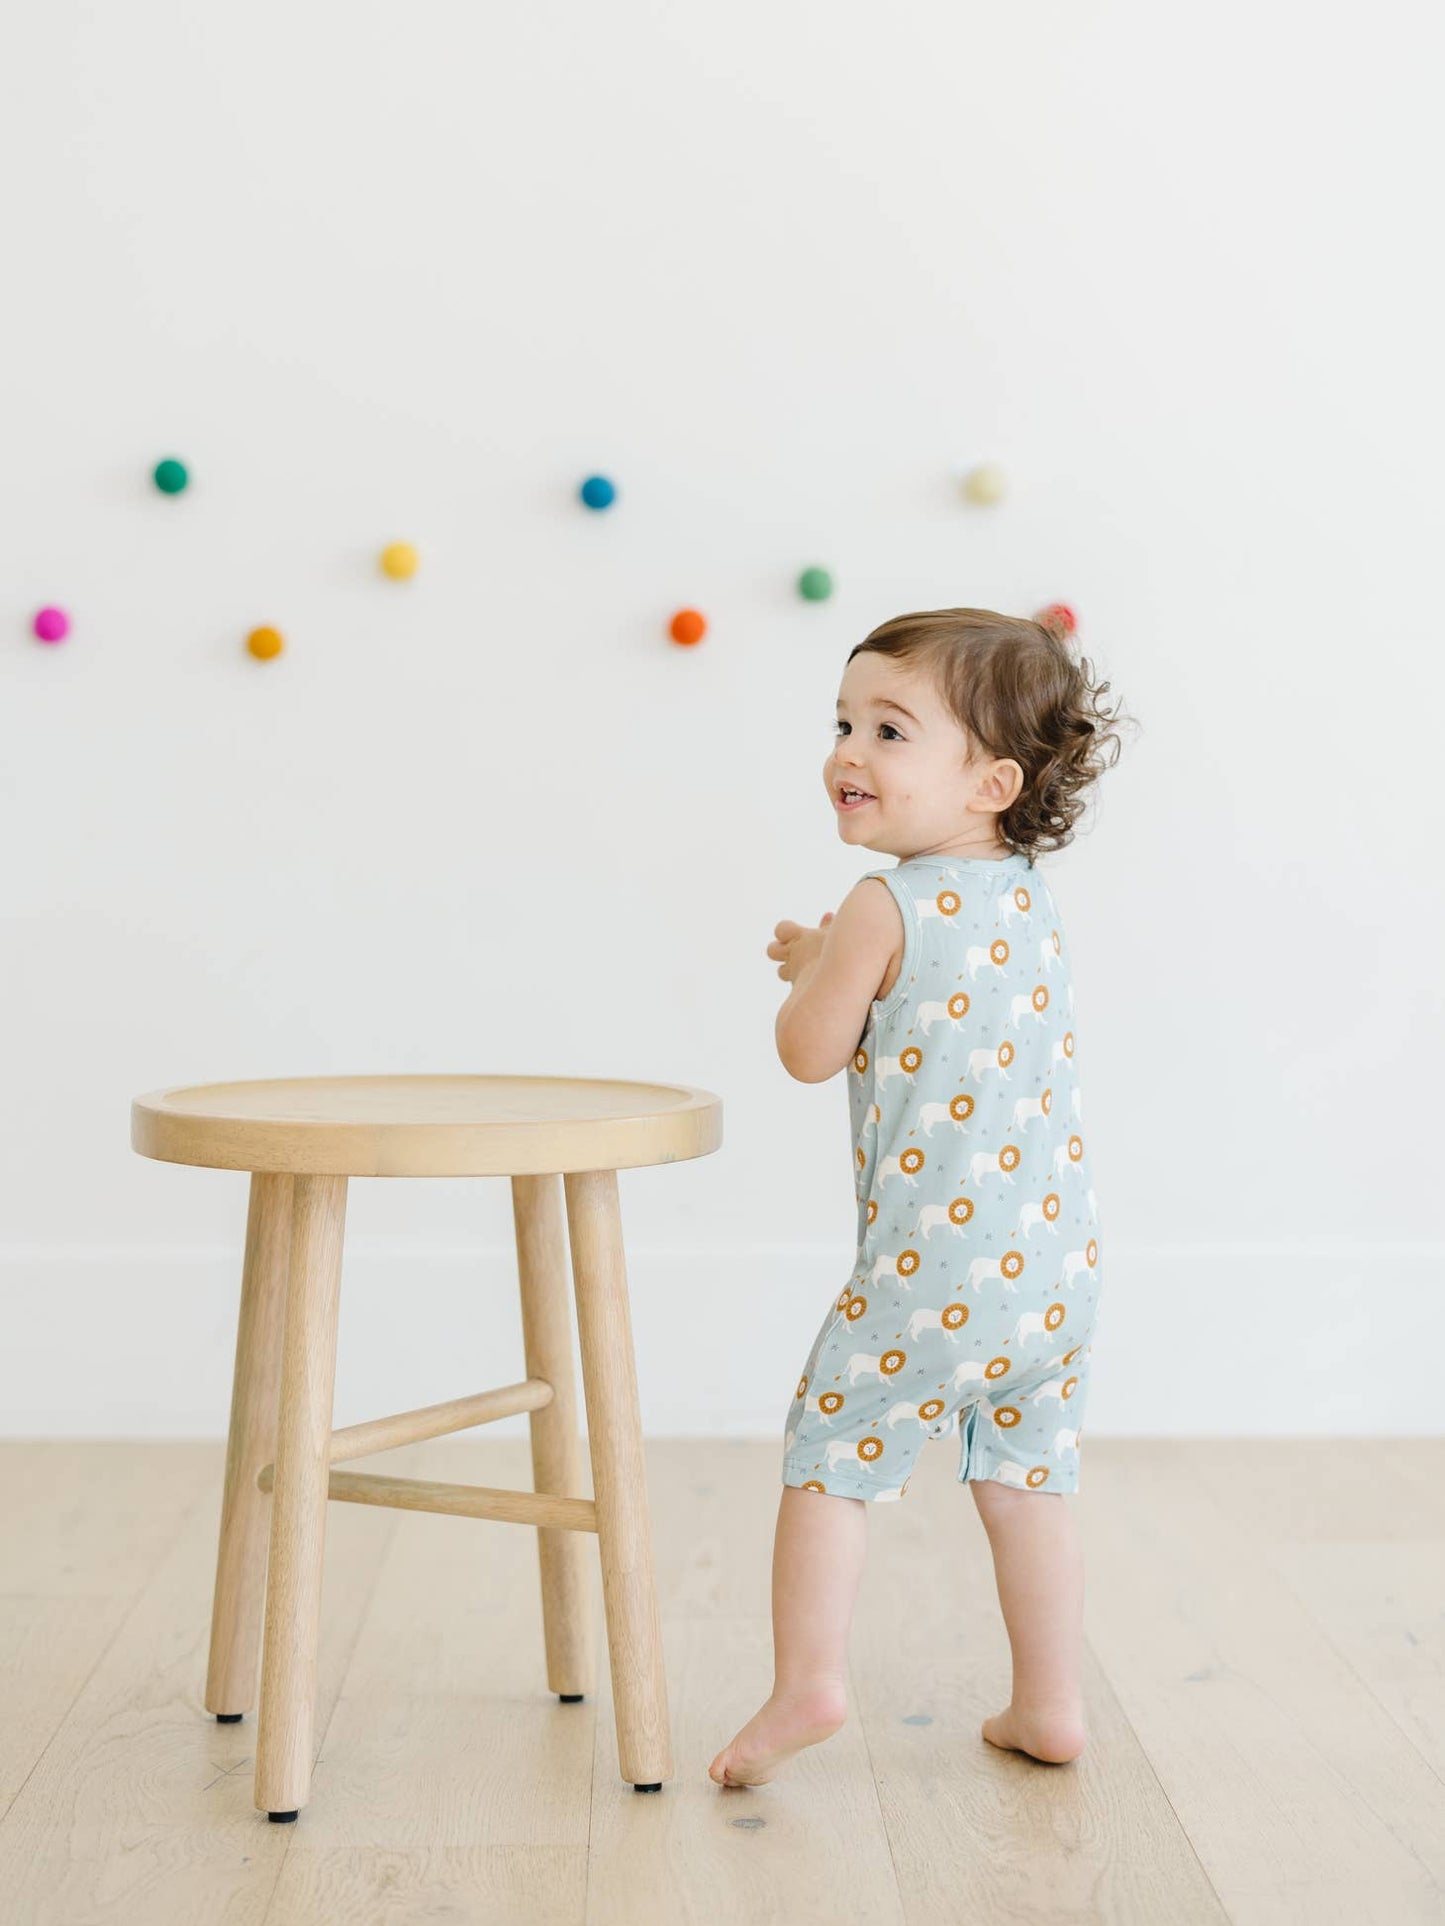 You're my Mane Squeeze - Lion Short Tank Romper